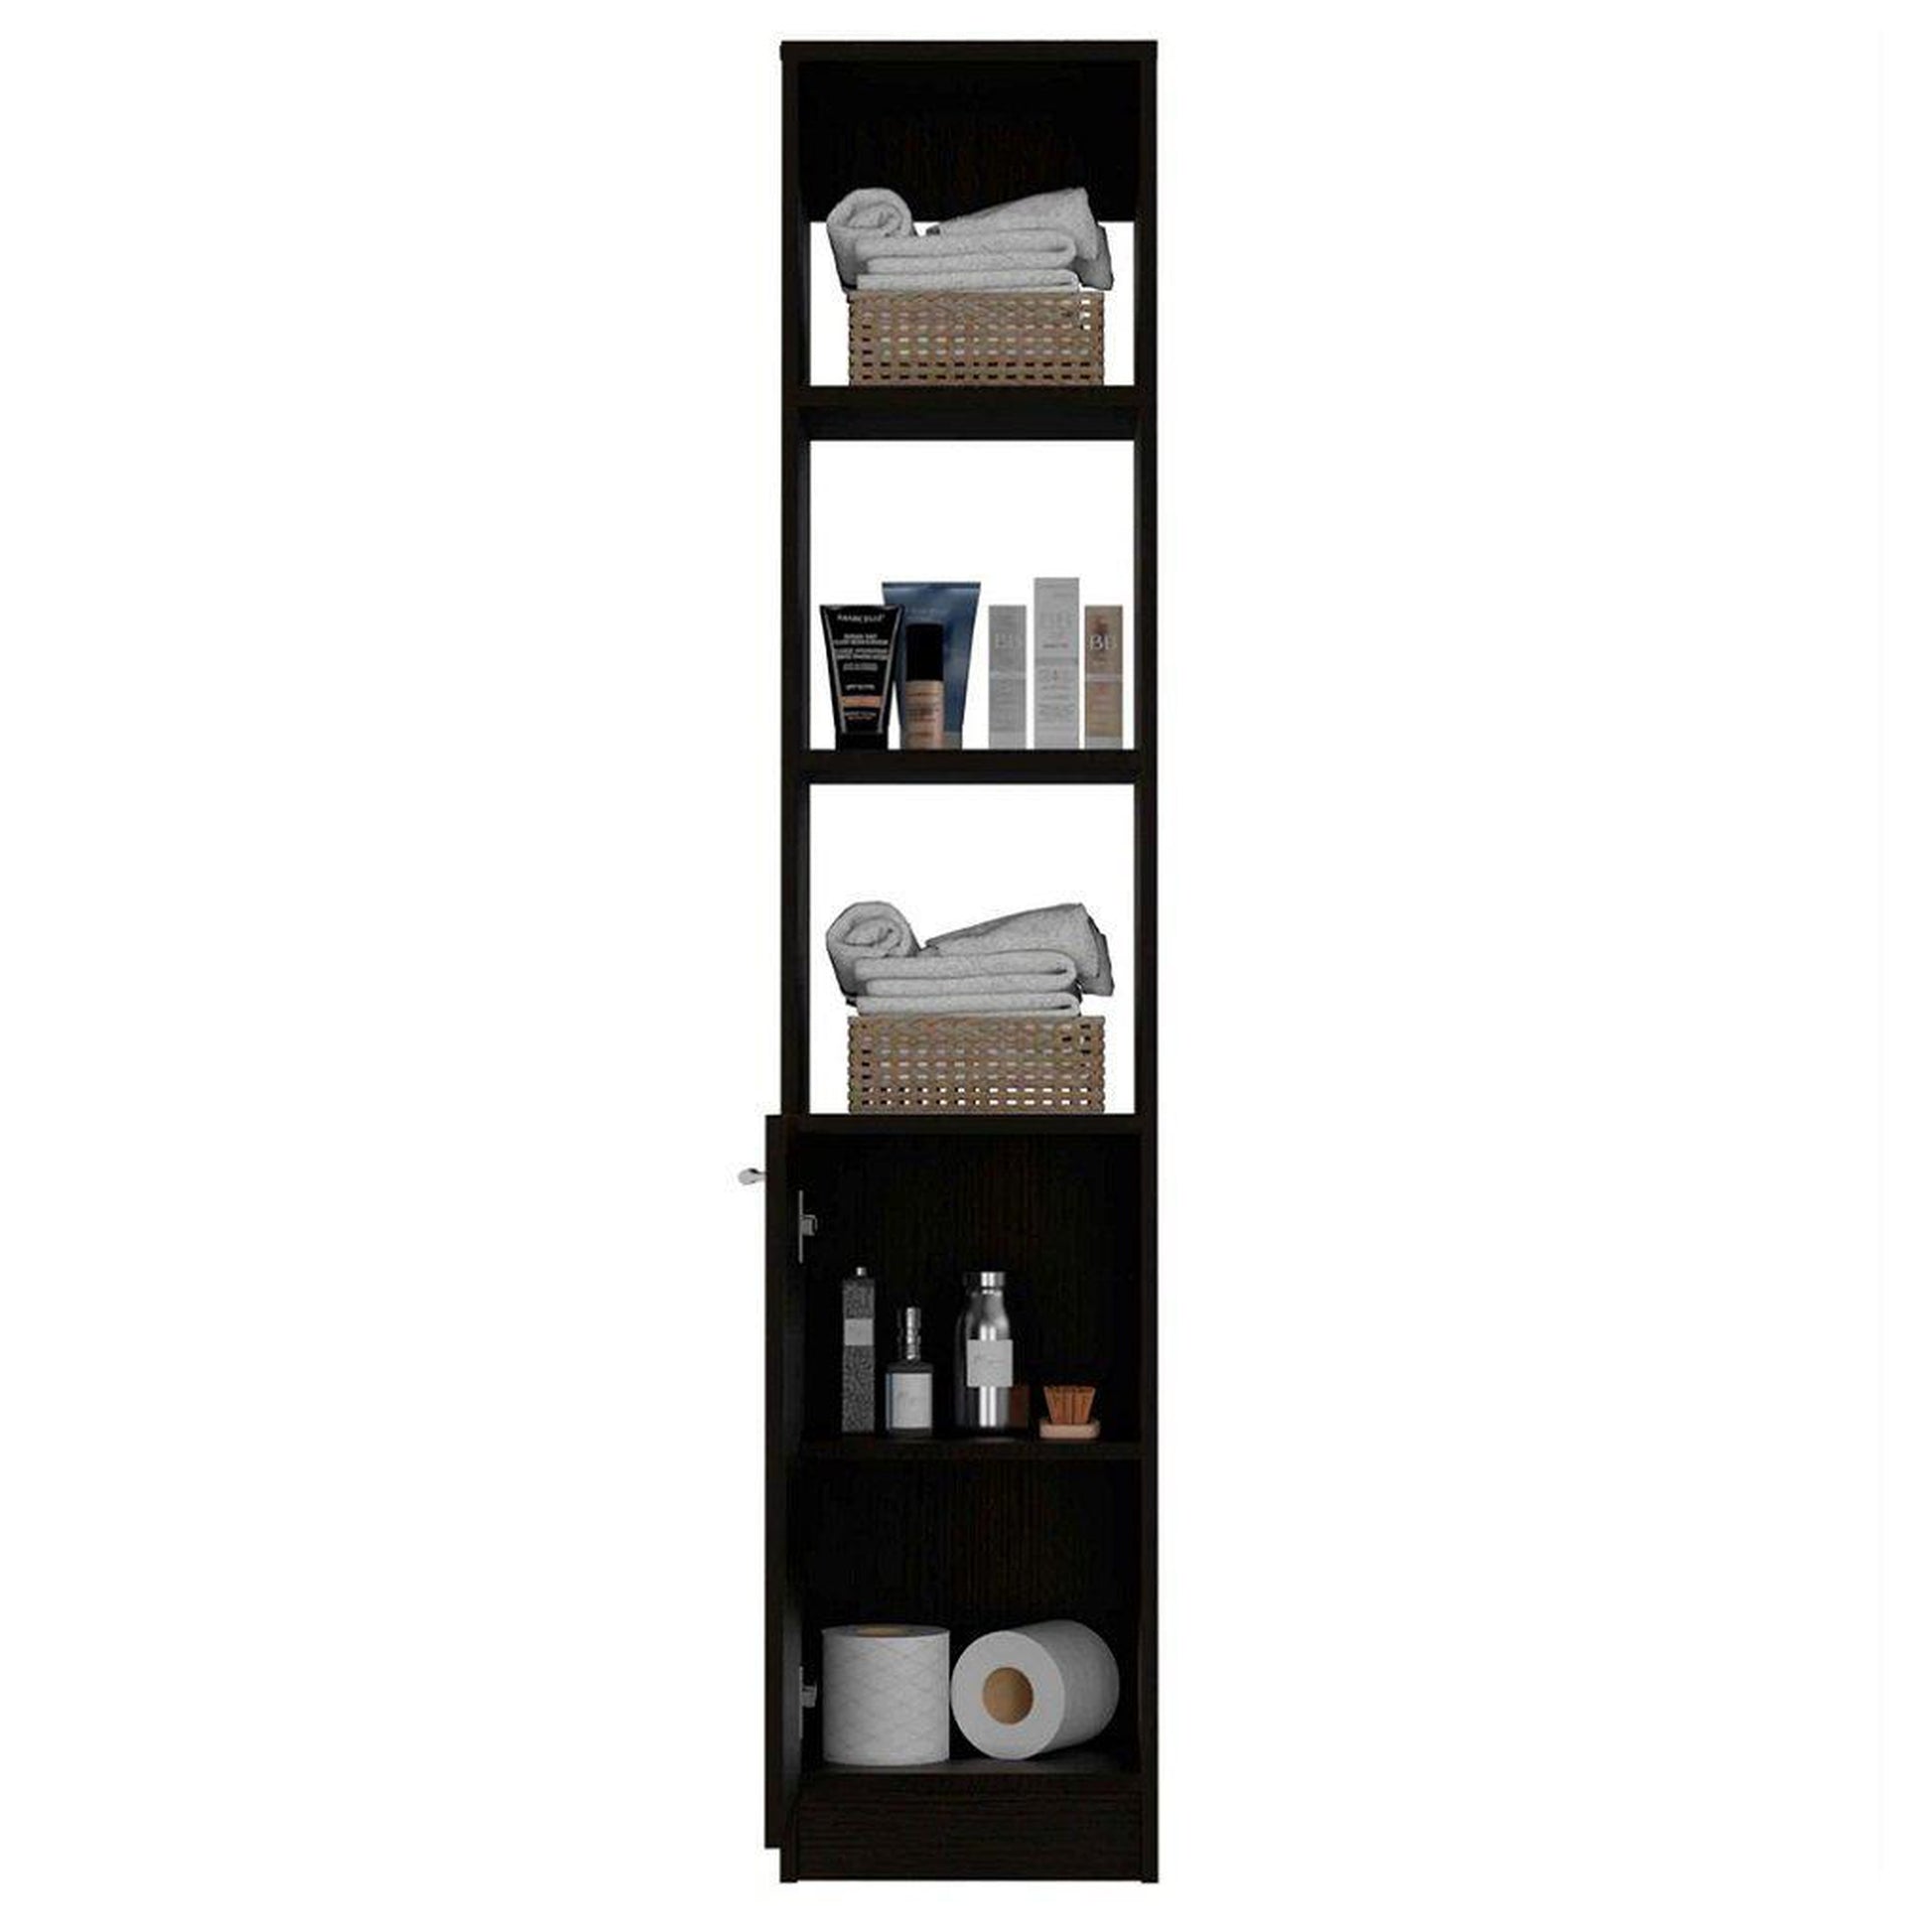 TUHOME Malaga 63" Black Wengue Freestanding Linen Cabinet With 3 Open Shelves